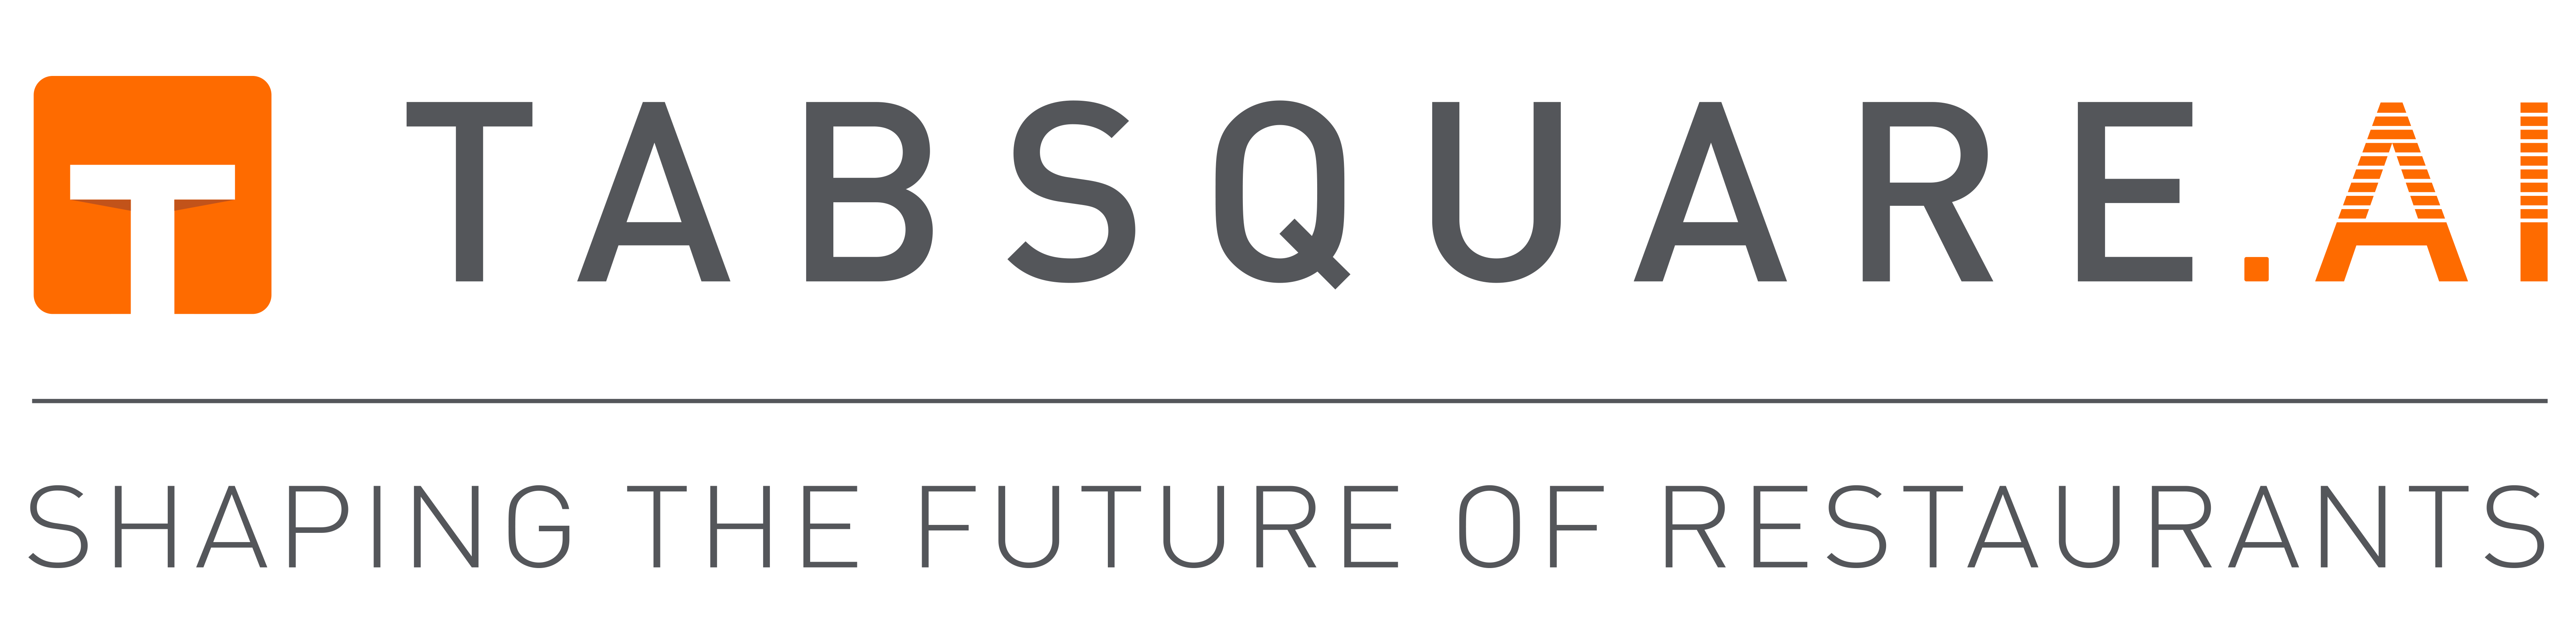 Leading Technology Company TabSquare Confident Of Success With Their Innovative Self-Ordering Kiosk System 